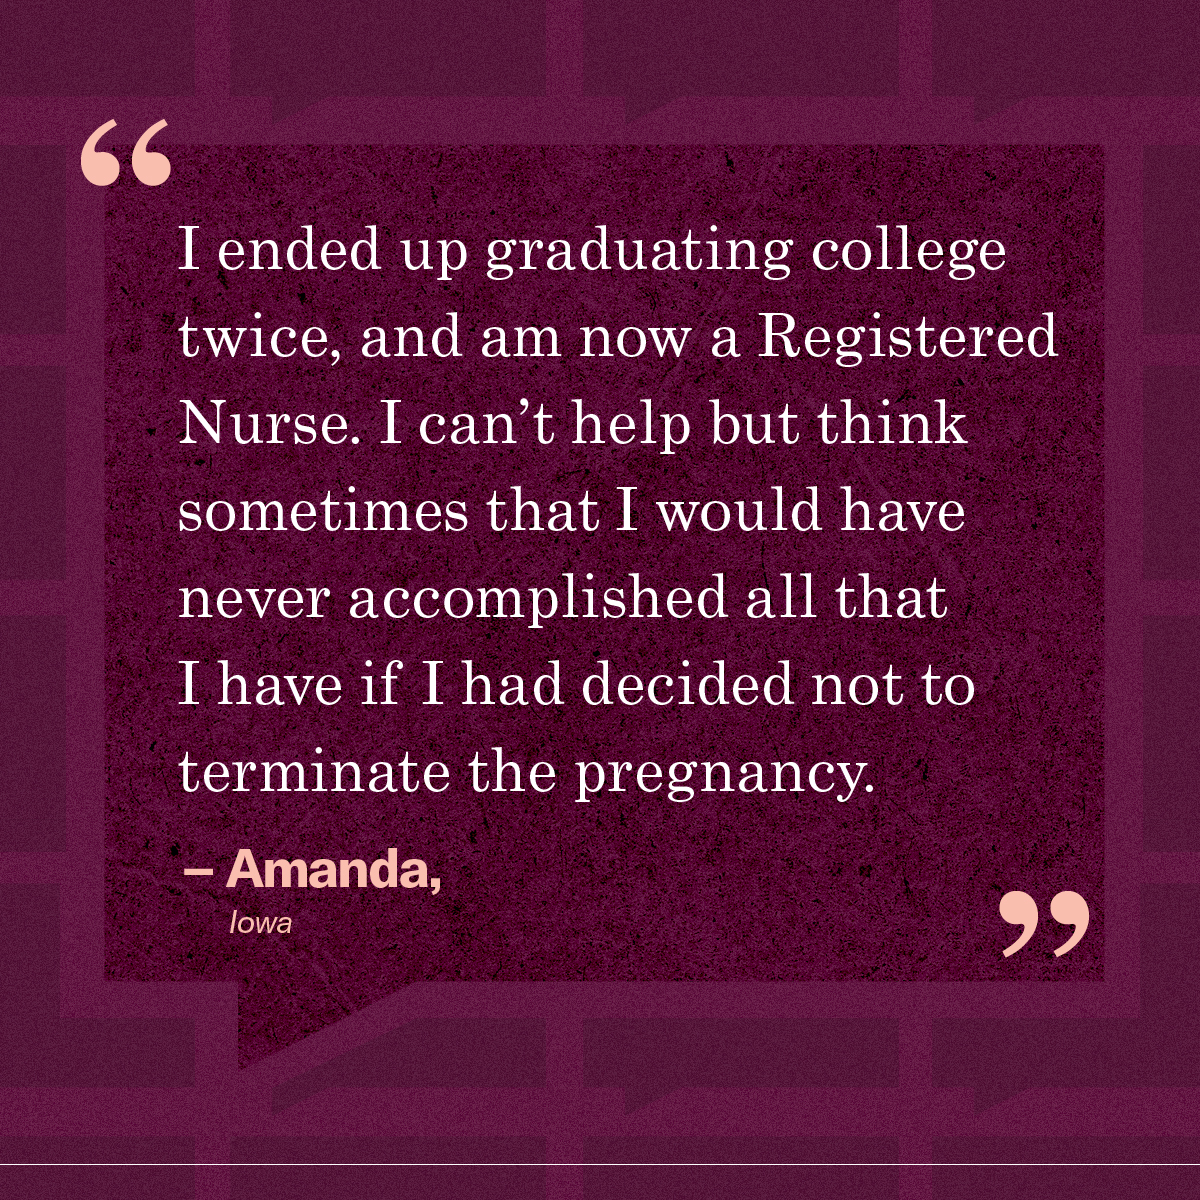 “I ended up graduating college twice, and am now a Registered Nurse. I can’t help but think sometimes that I would have never accomplished all that I have if I had decided not to terminate the pregnancy.” – Amanda, Iowa